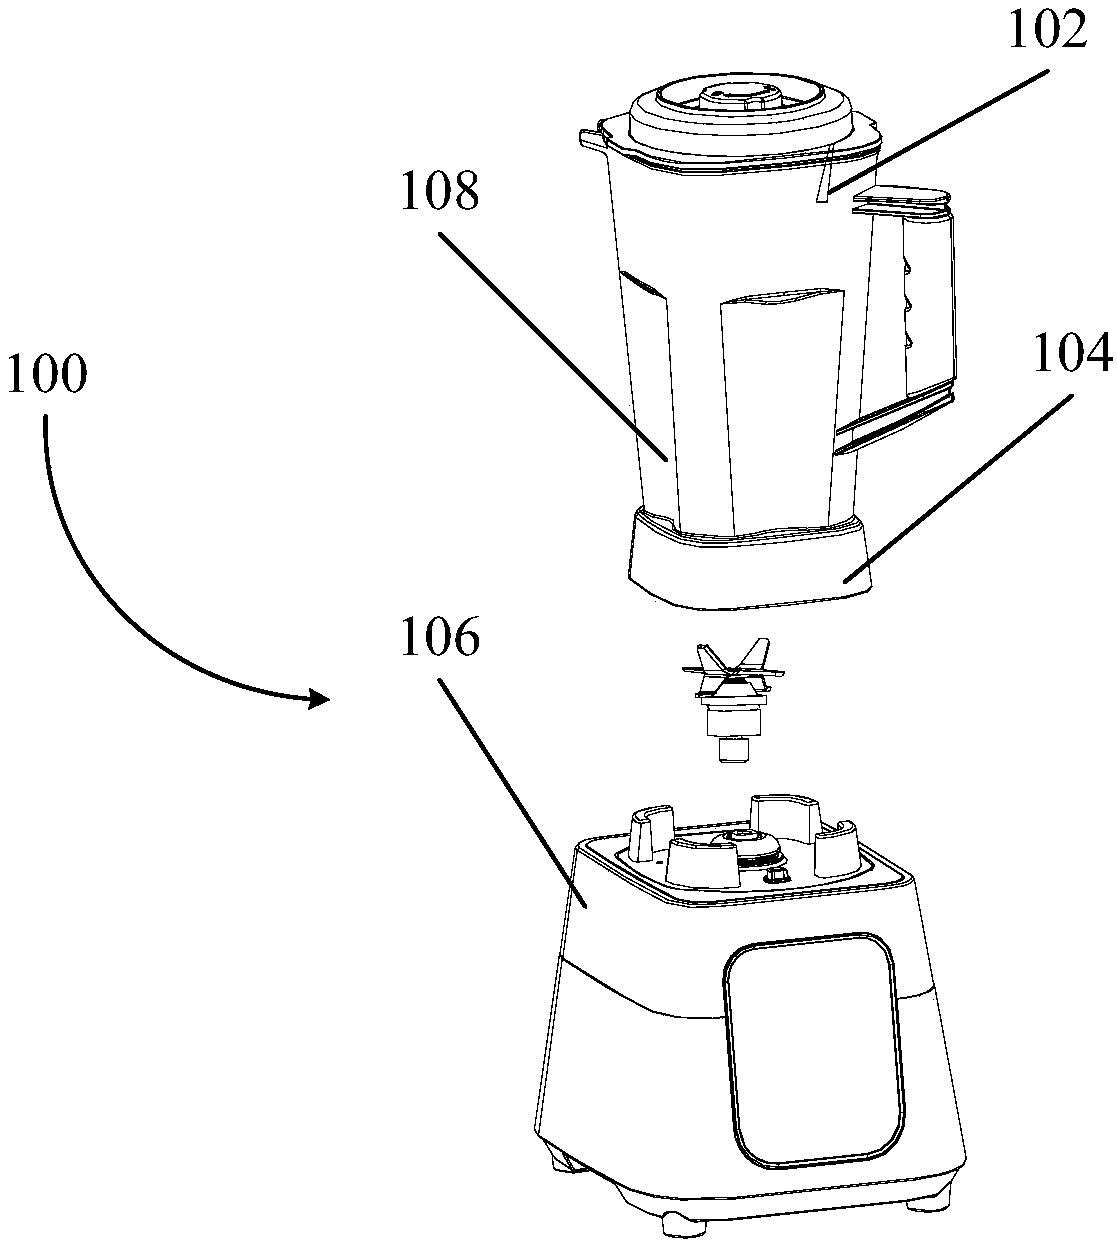 Food processor and overflowing-preventing detection method